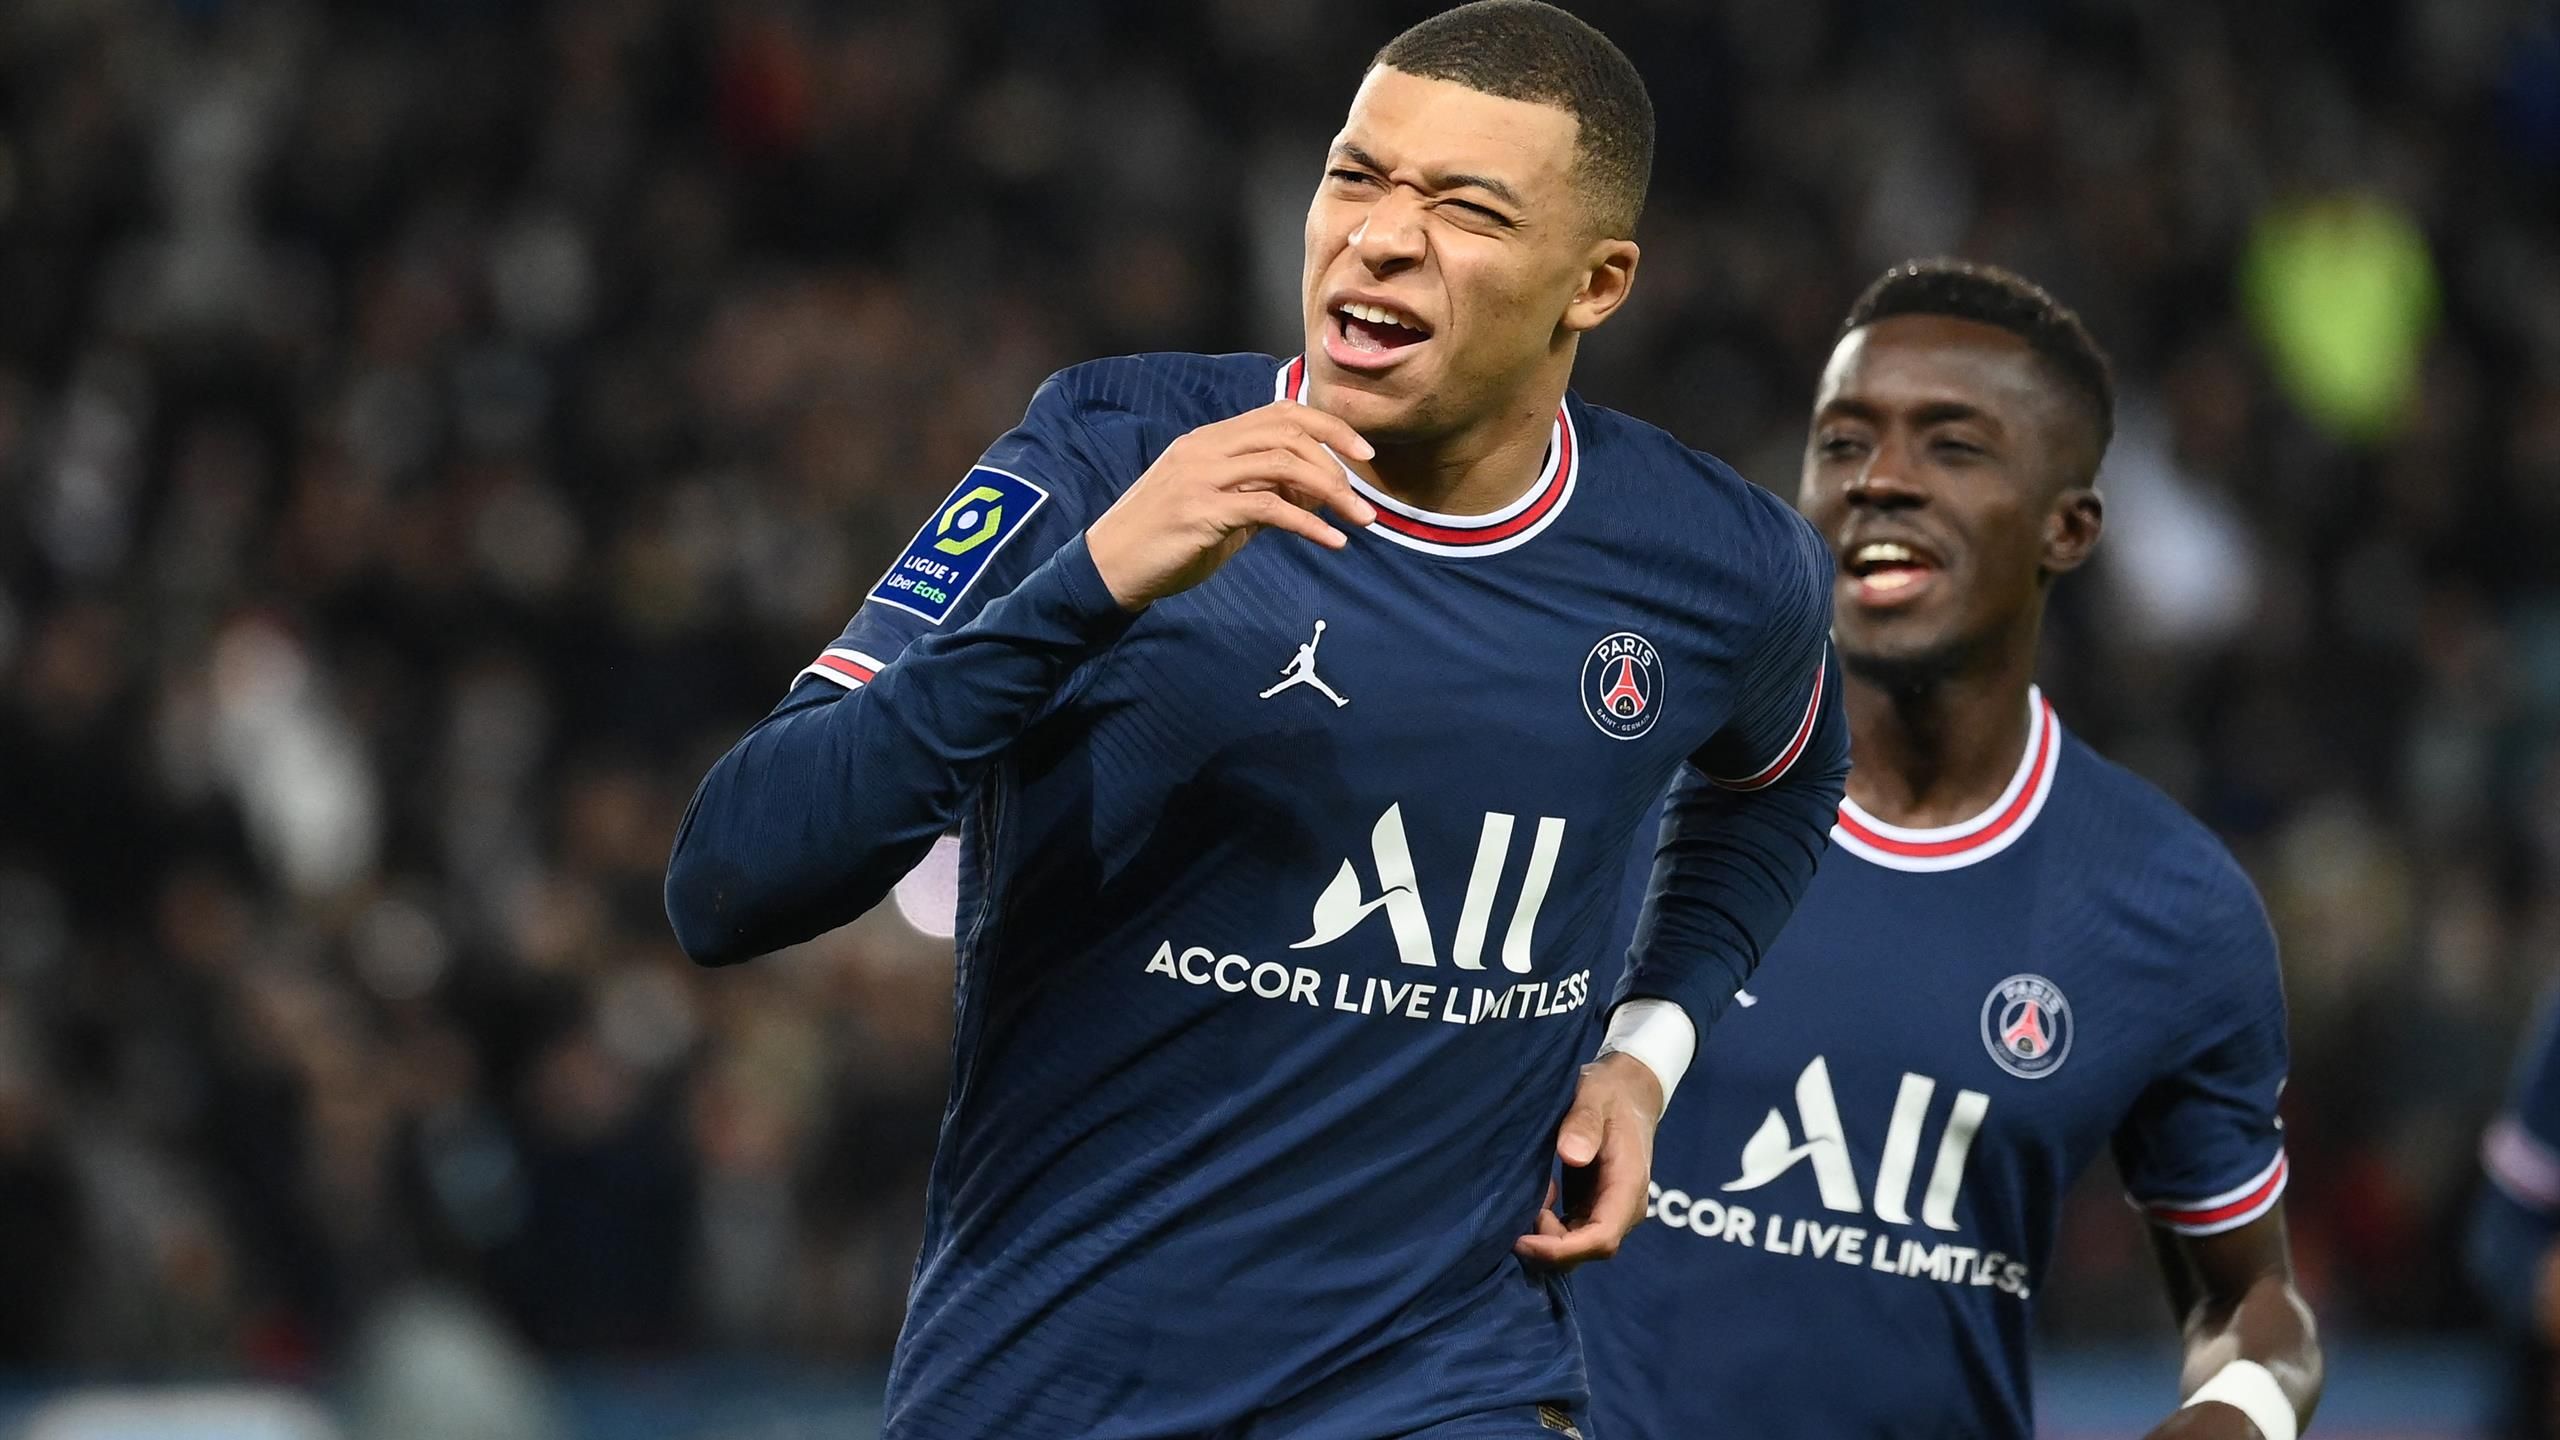 Psg 2 0 Monaco Kylian Mbappe Scores Twice Against His Former Club To Give Les Parisiens A 13 Point Lead In Ligue 1 Eurosport